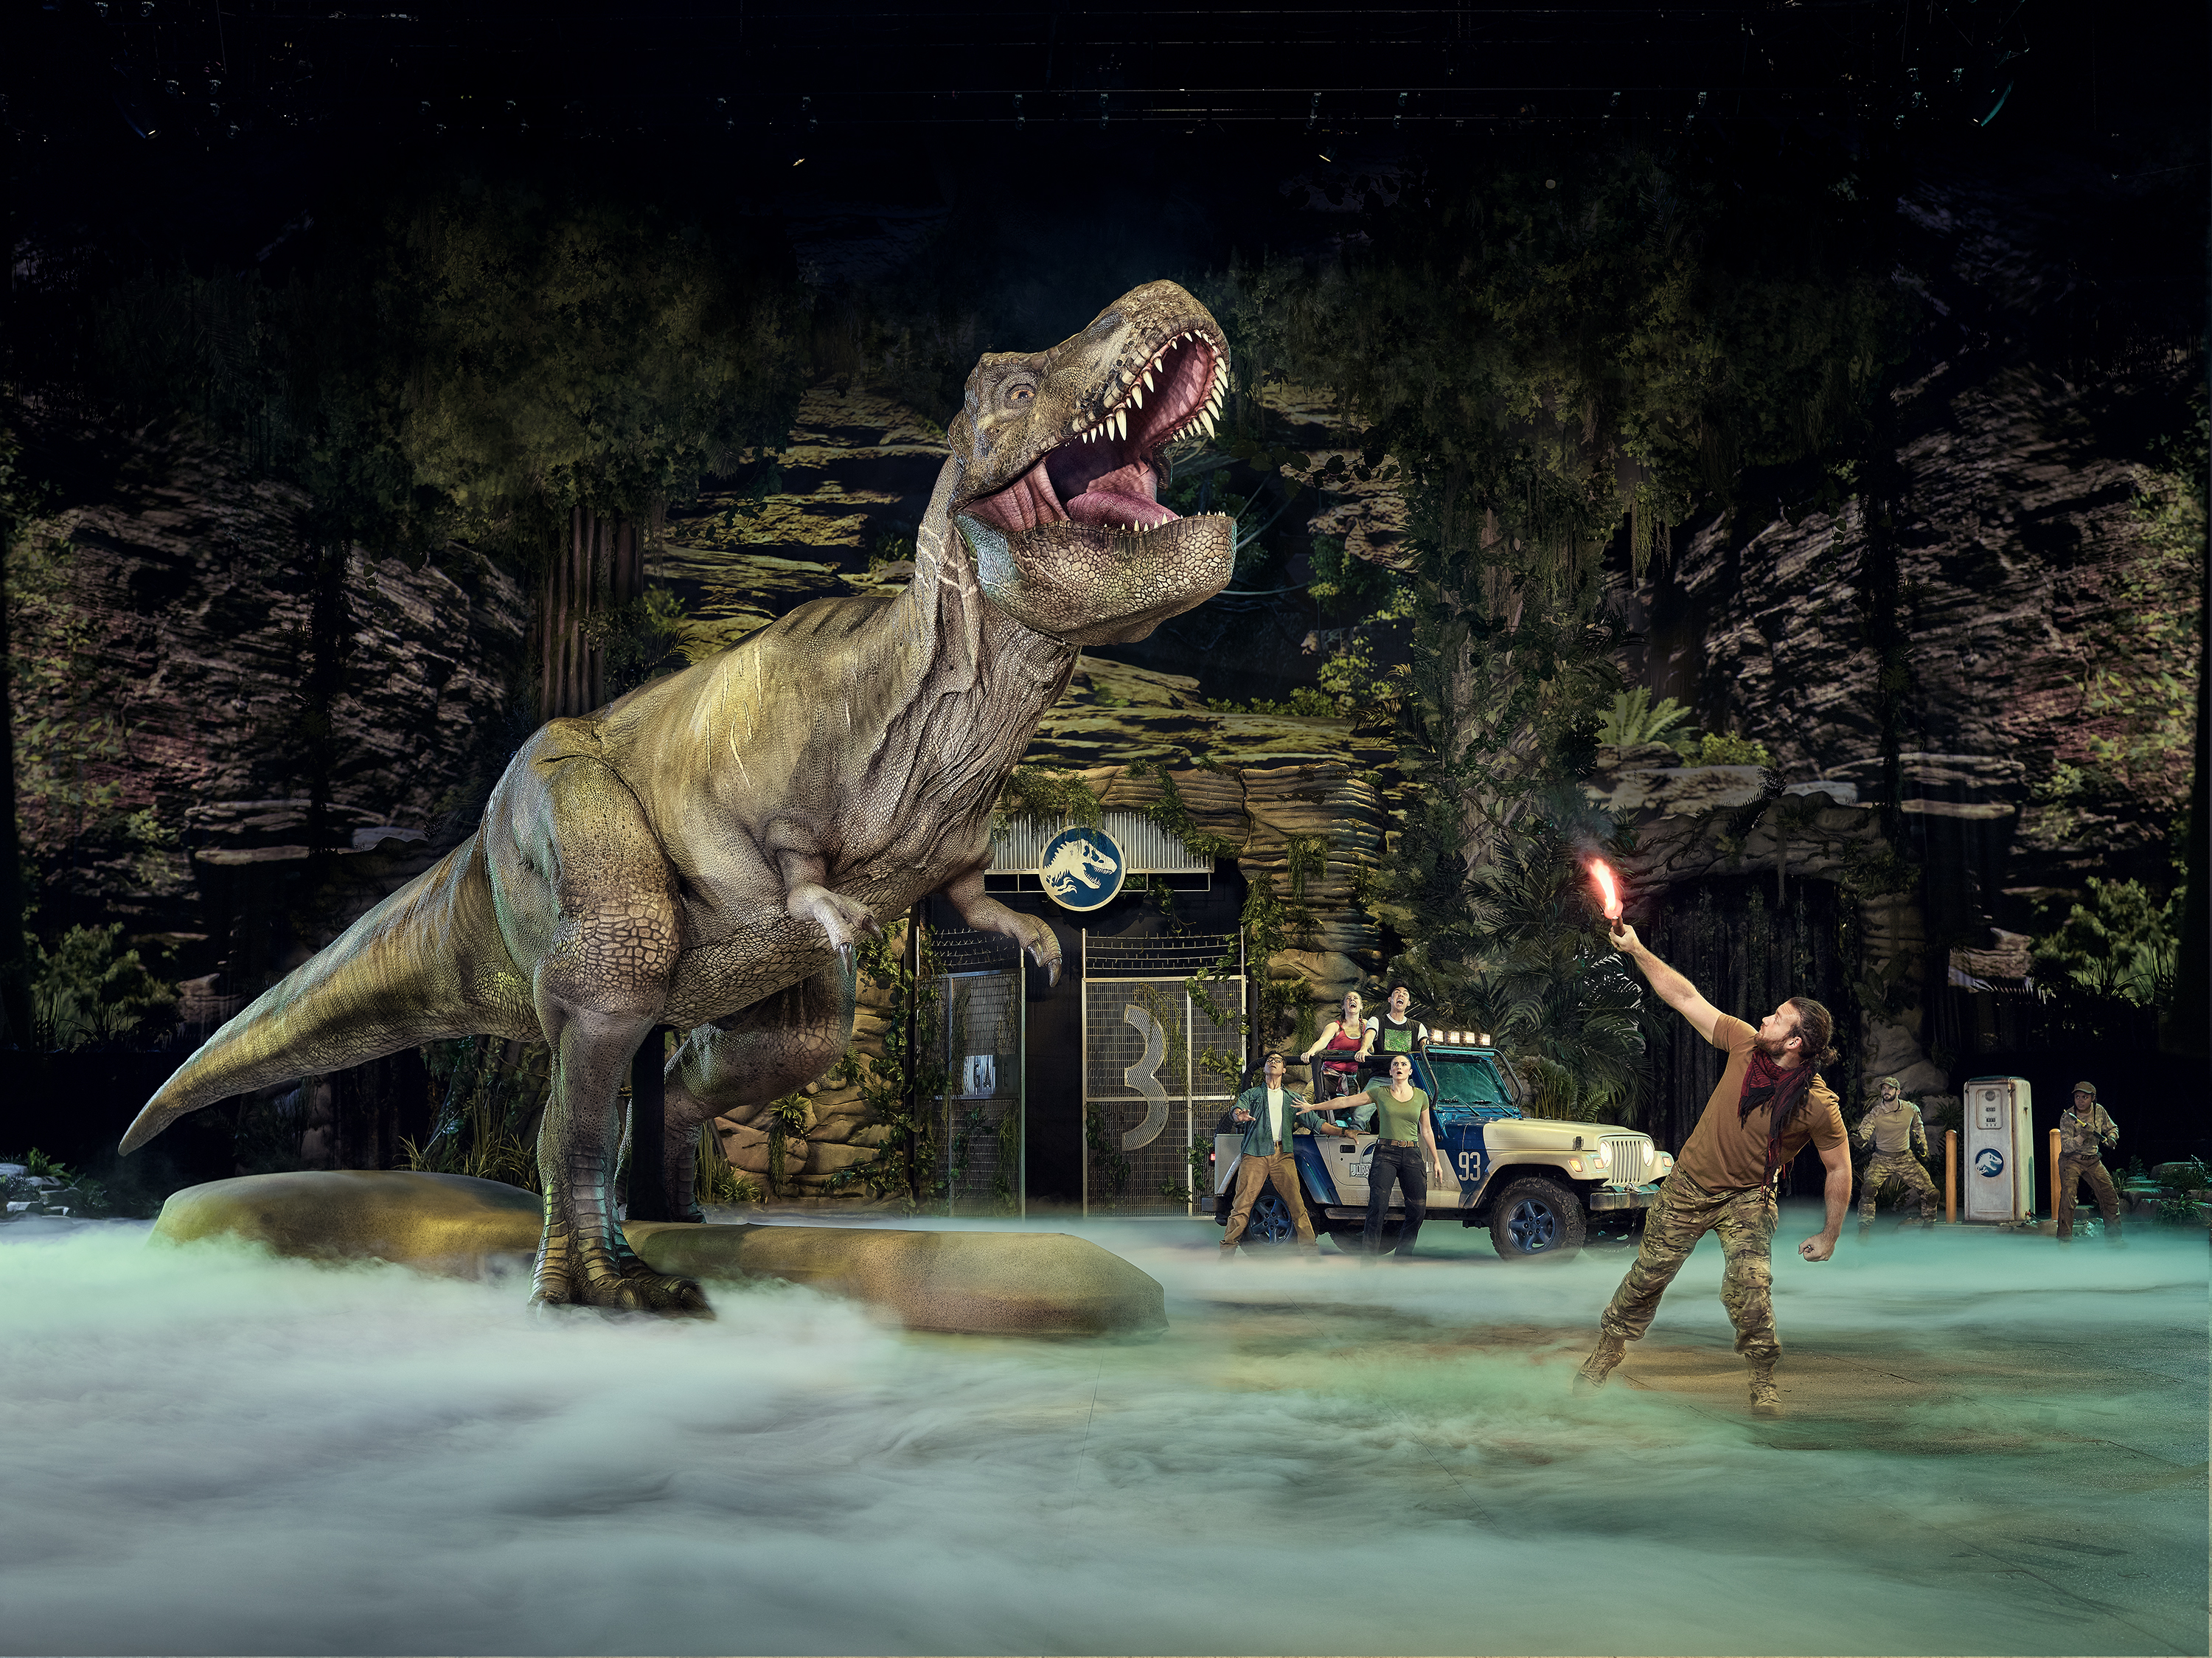 The Jurassic World Live Tour is coming to Worcester's DCU Center for multiple weekend performances in April 2023. Photograph courtesy of Jurassic World Live Tour via Feld Entertainment.